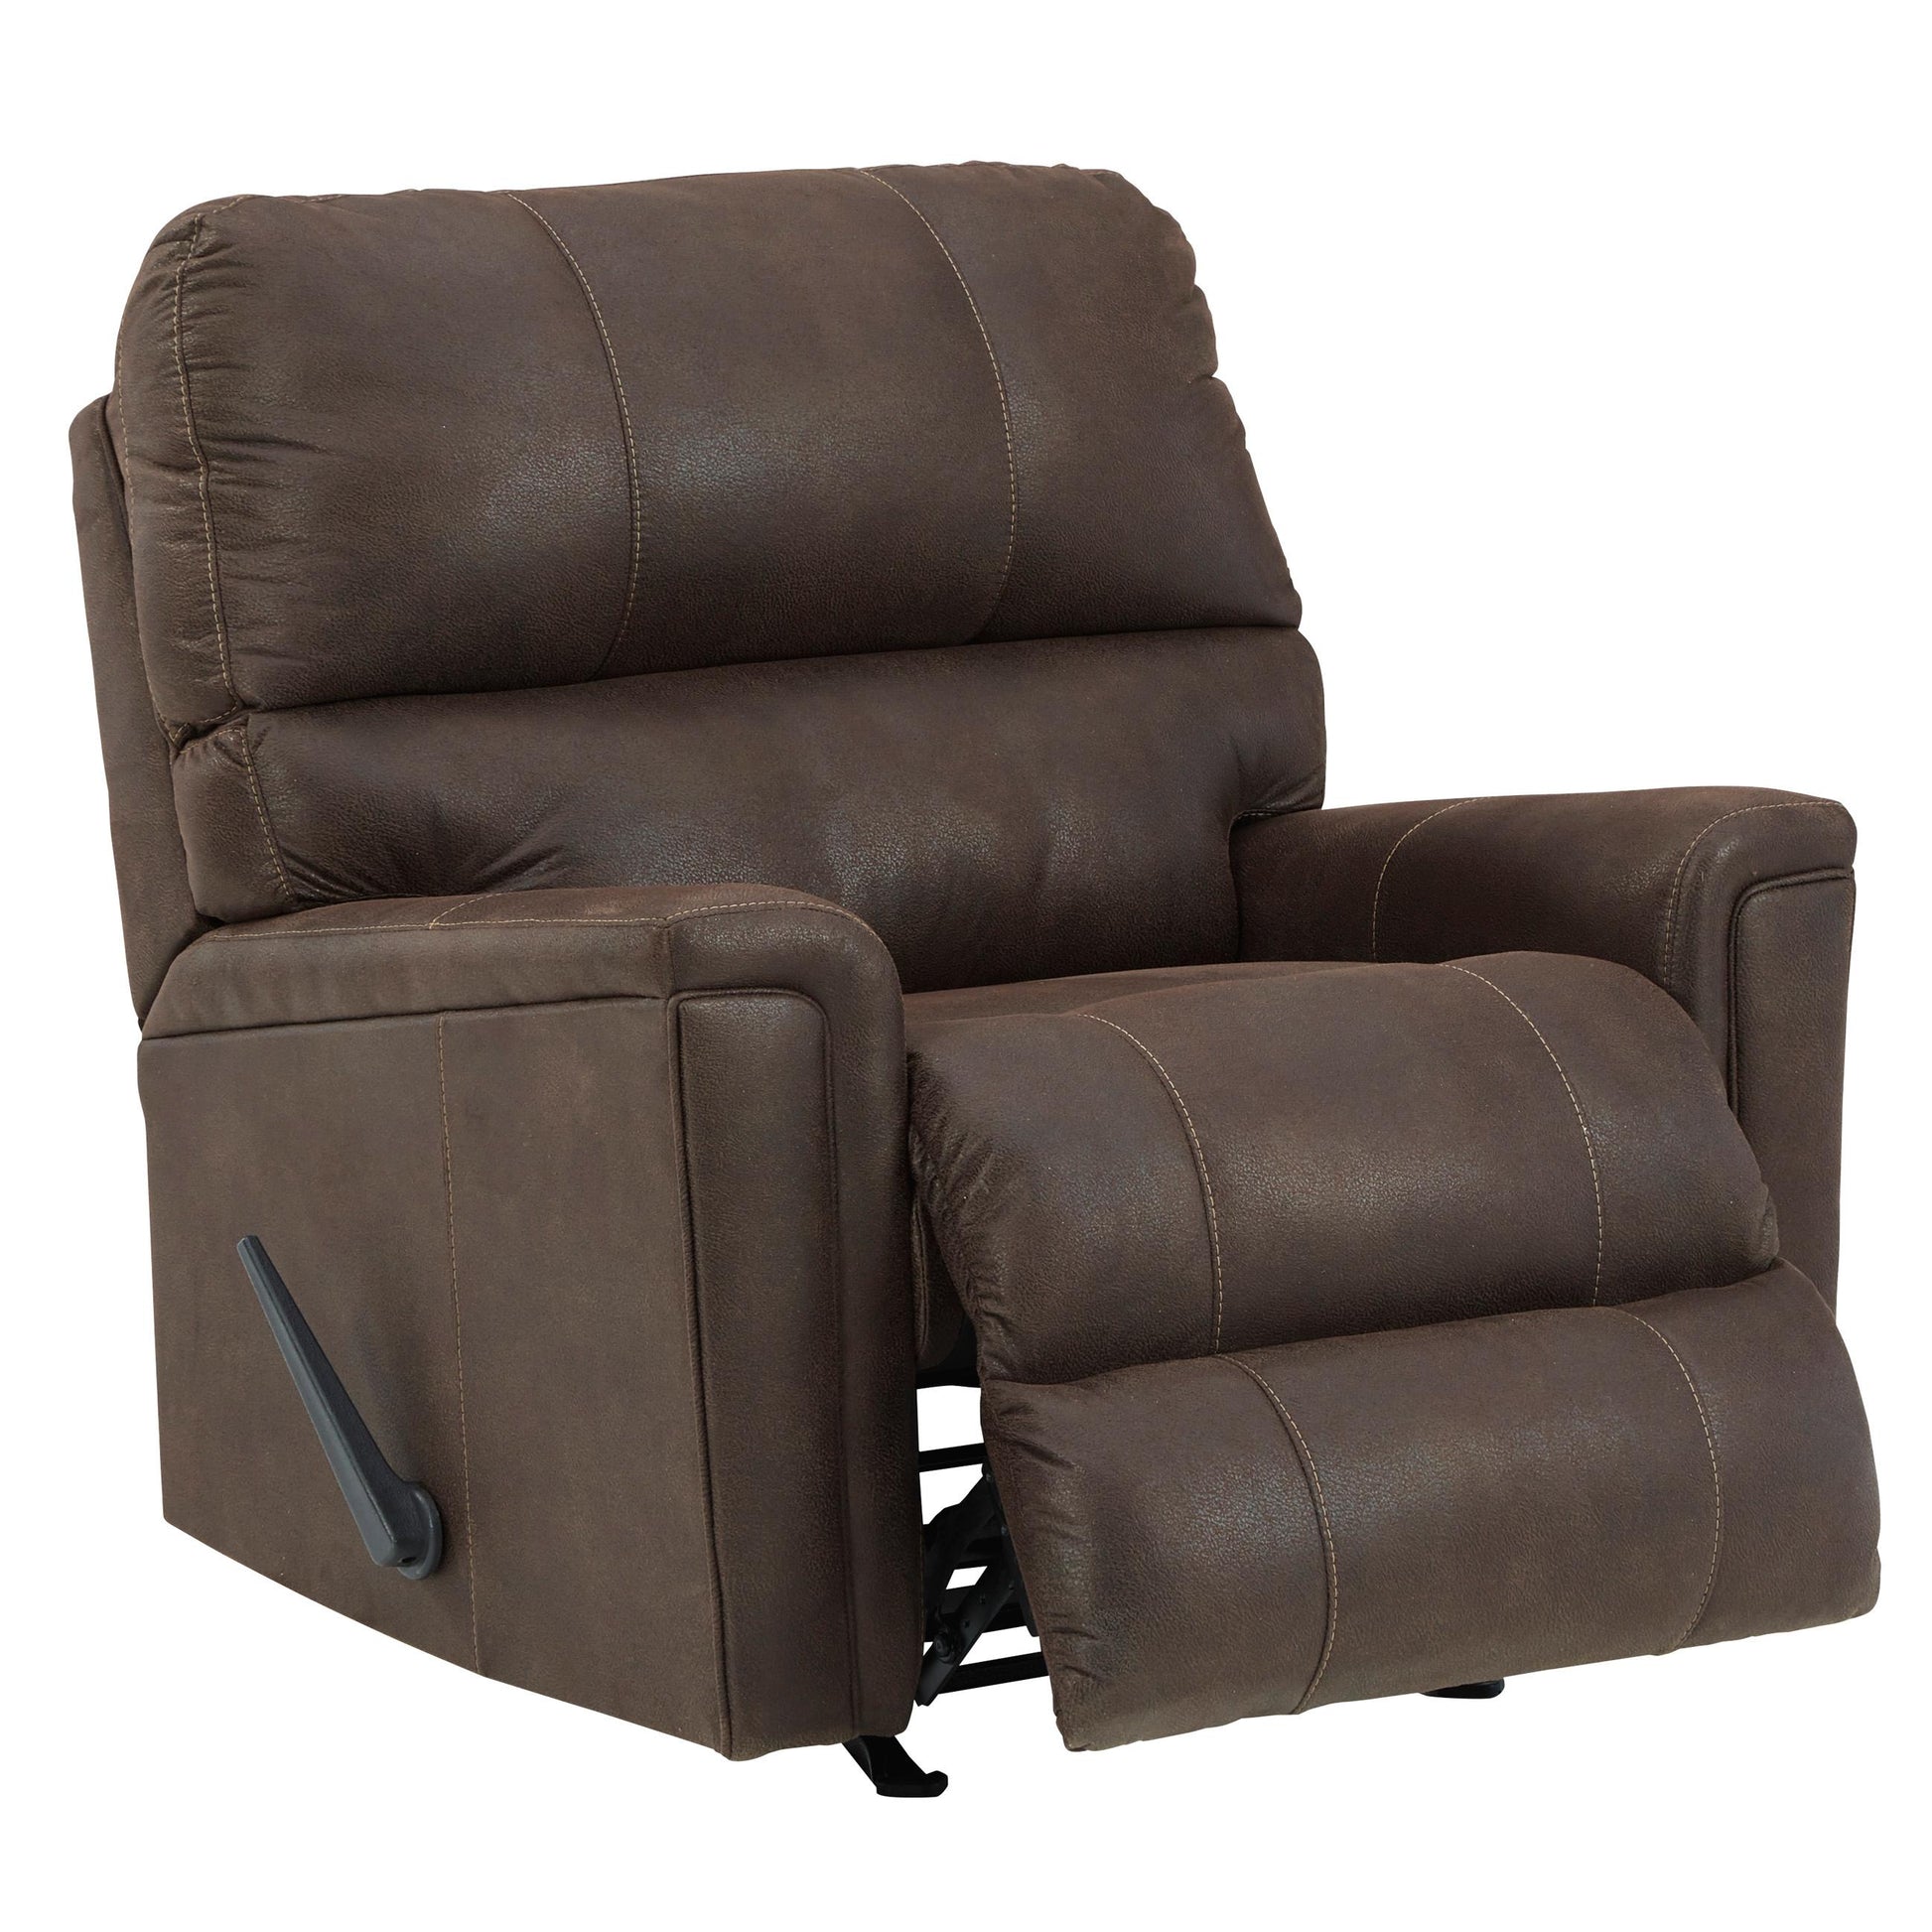 Signature Design by Ashley Navi Rocker Leather Look Recliner 9400325 IMAGE 2